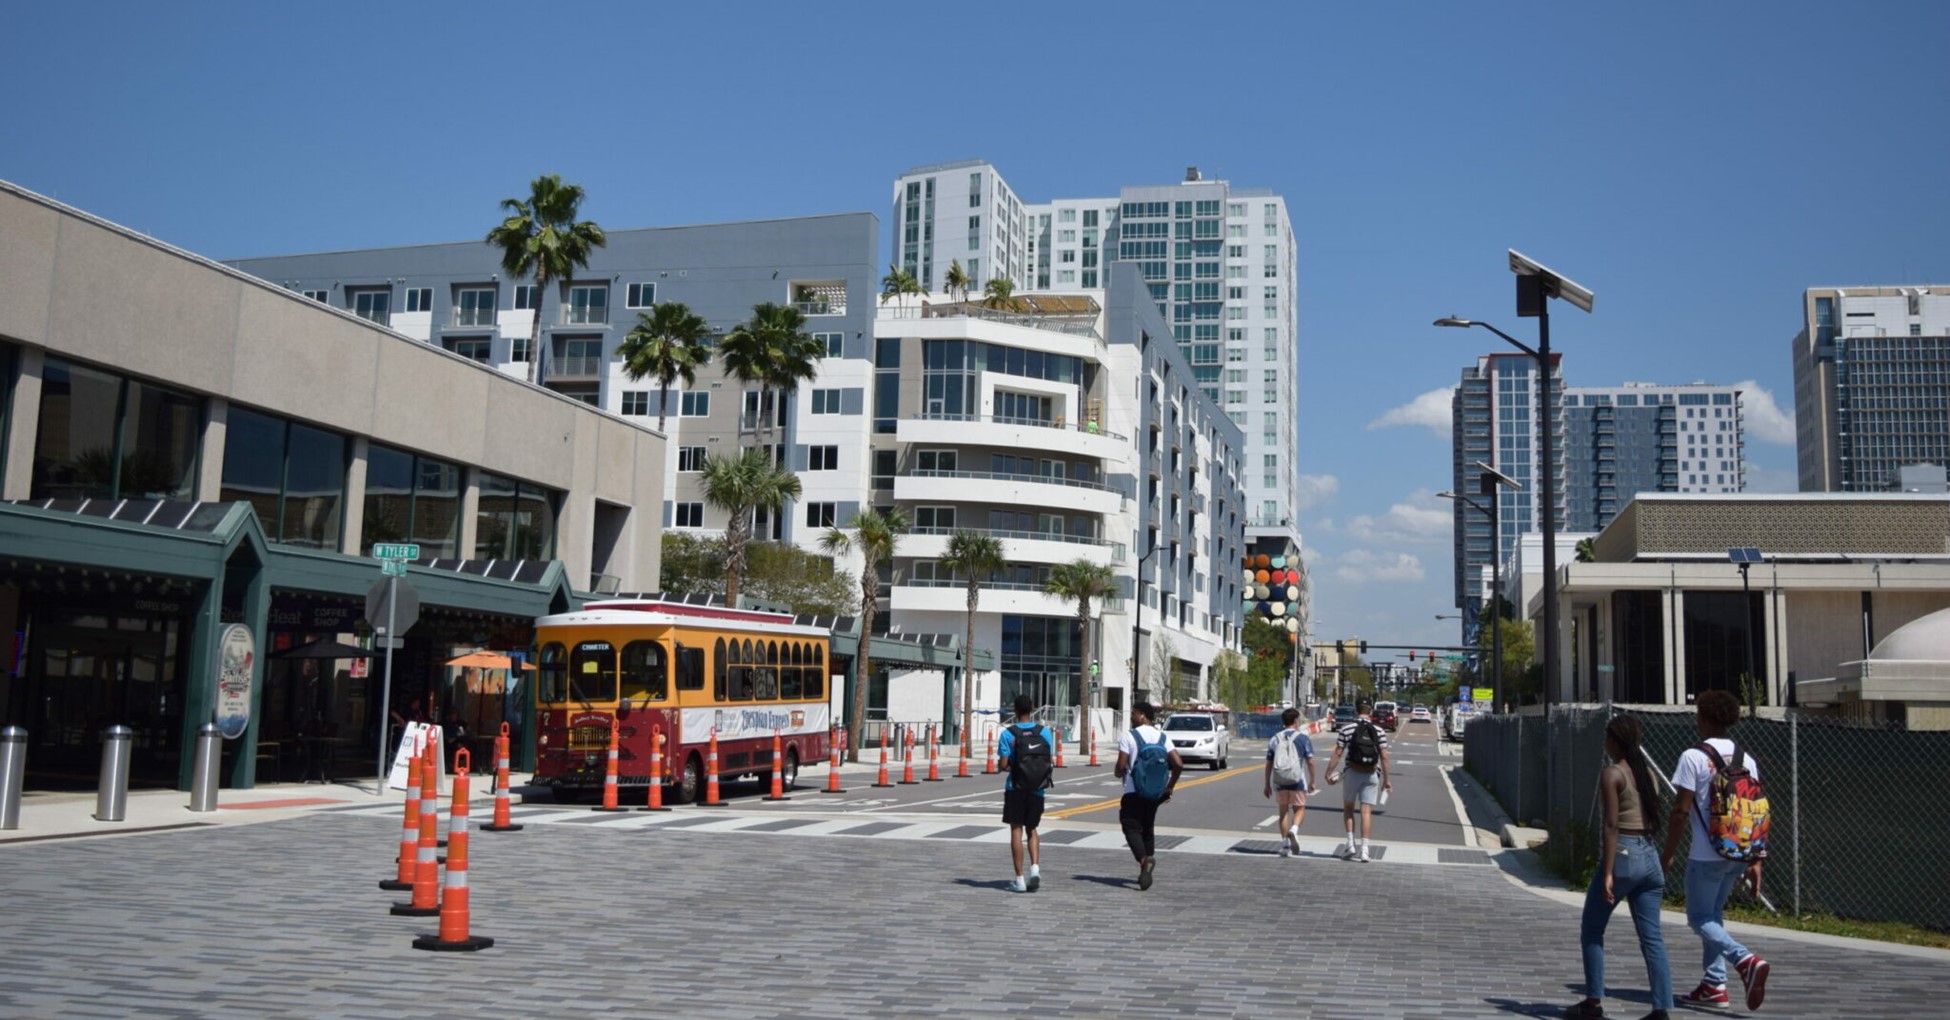 Downtown Tampa street scape with pedestrians, Street Car, and various buildings.